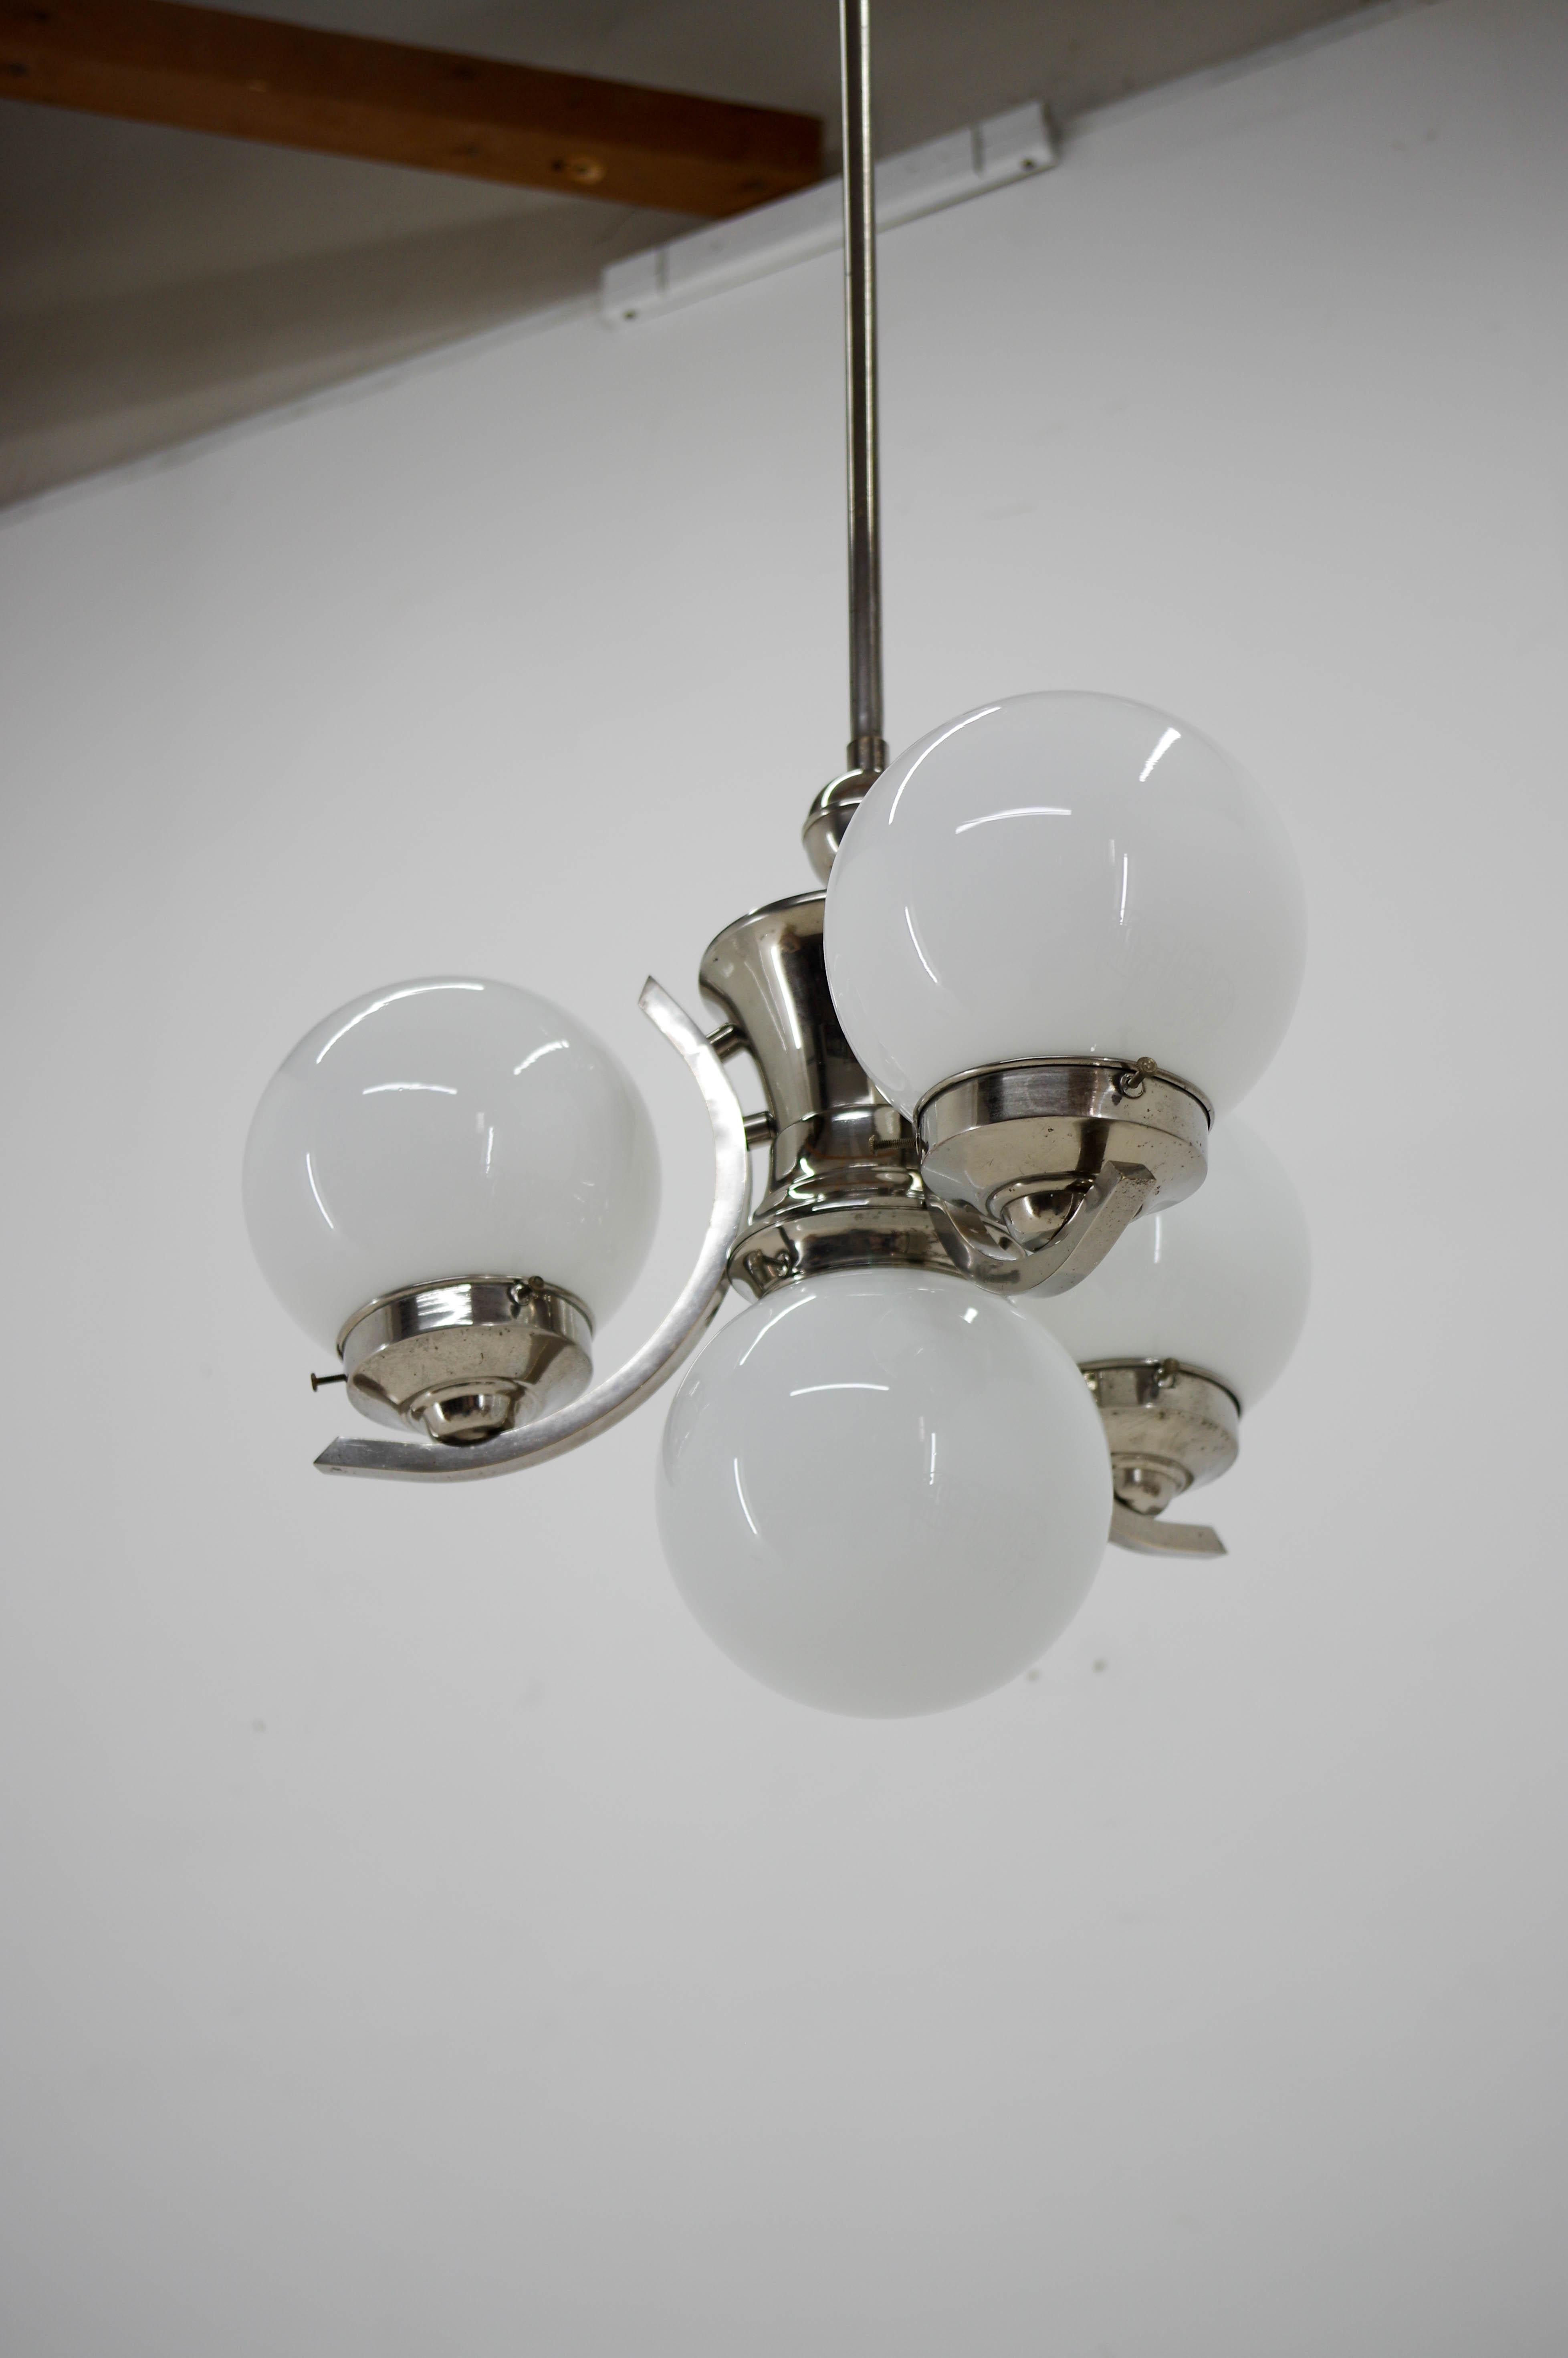 4-flamming Art Deco chandelier with opaline glass shades.
Central rod can be shortened on demand.
One dent on a glass shade not visible when assembled.
Restored: nickel with minimum loses polished, rewired.
Two separate circuits: 1+3x60W, E25-E27